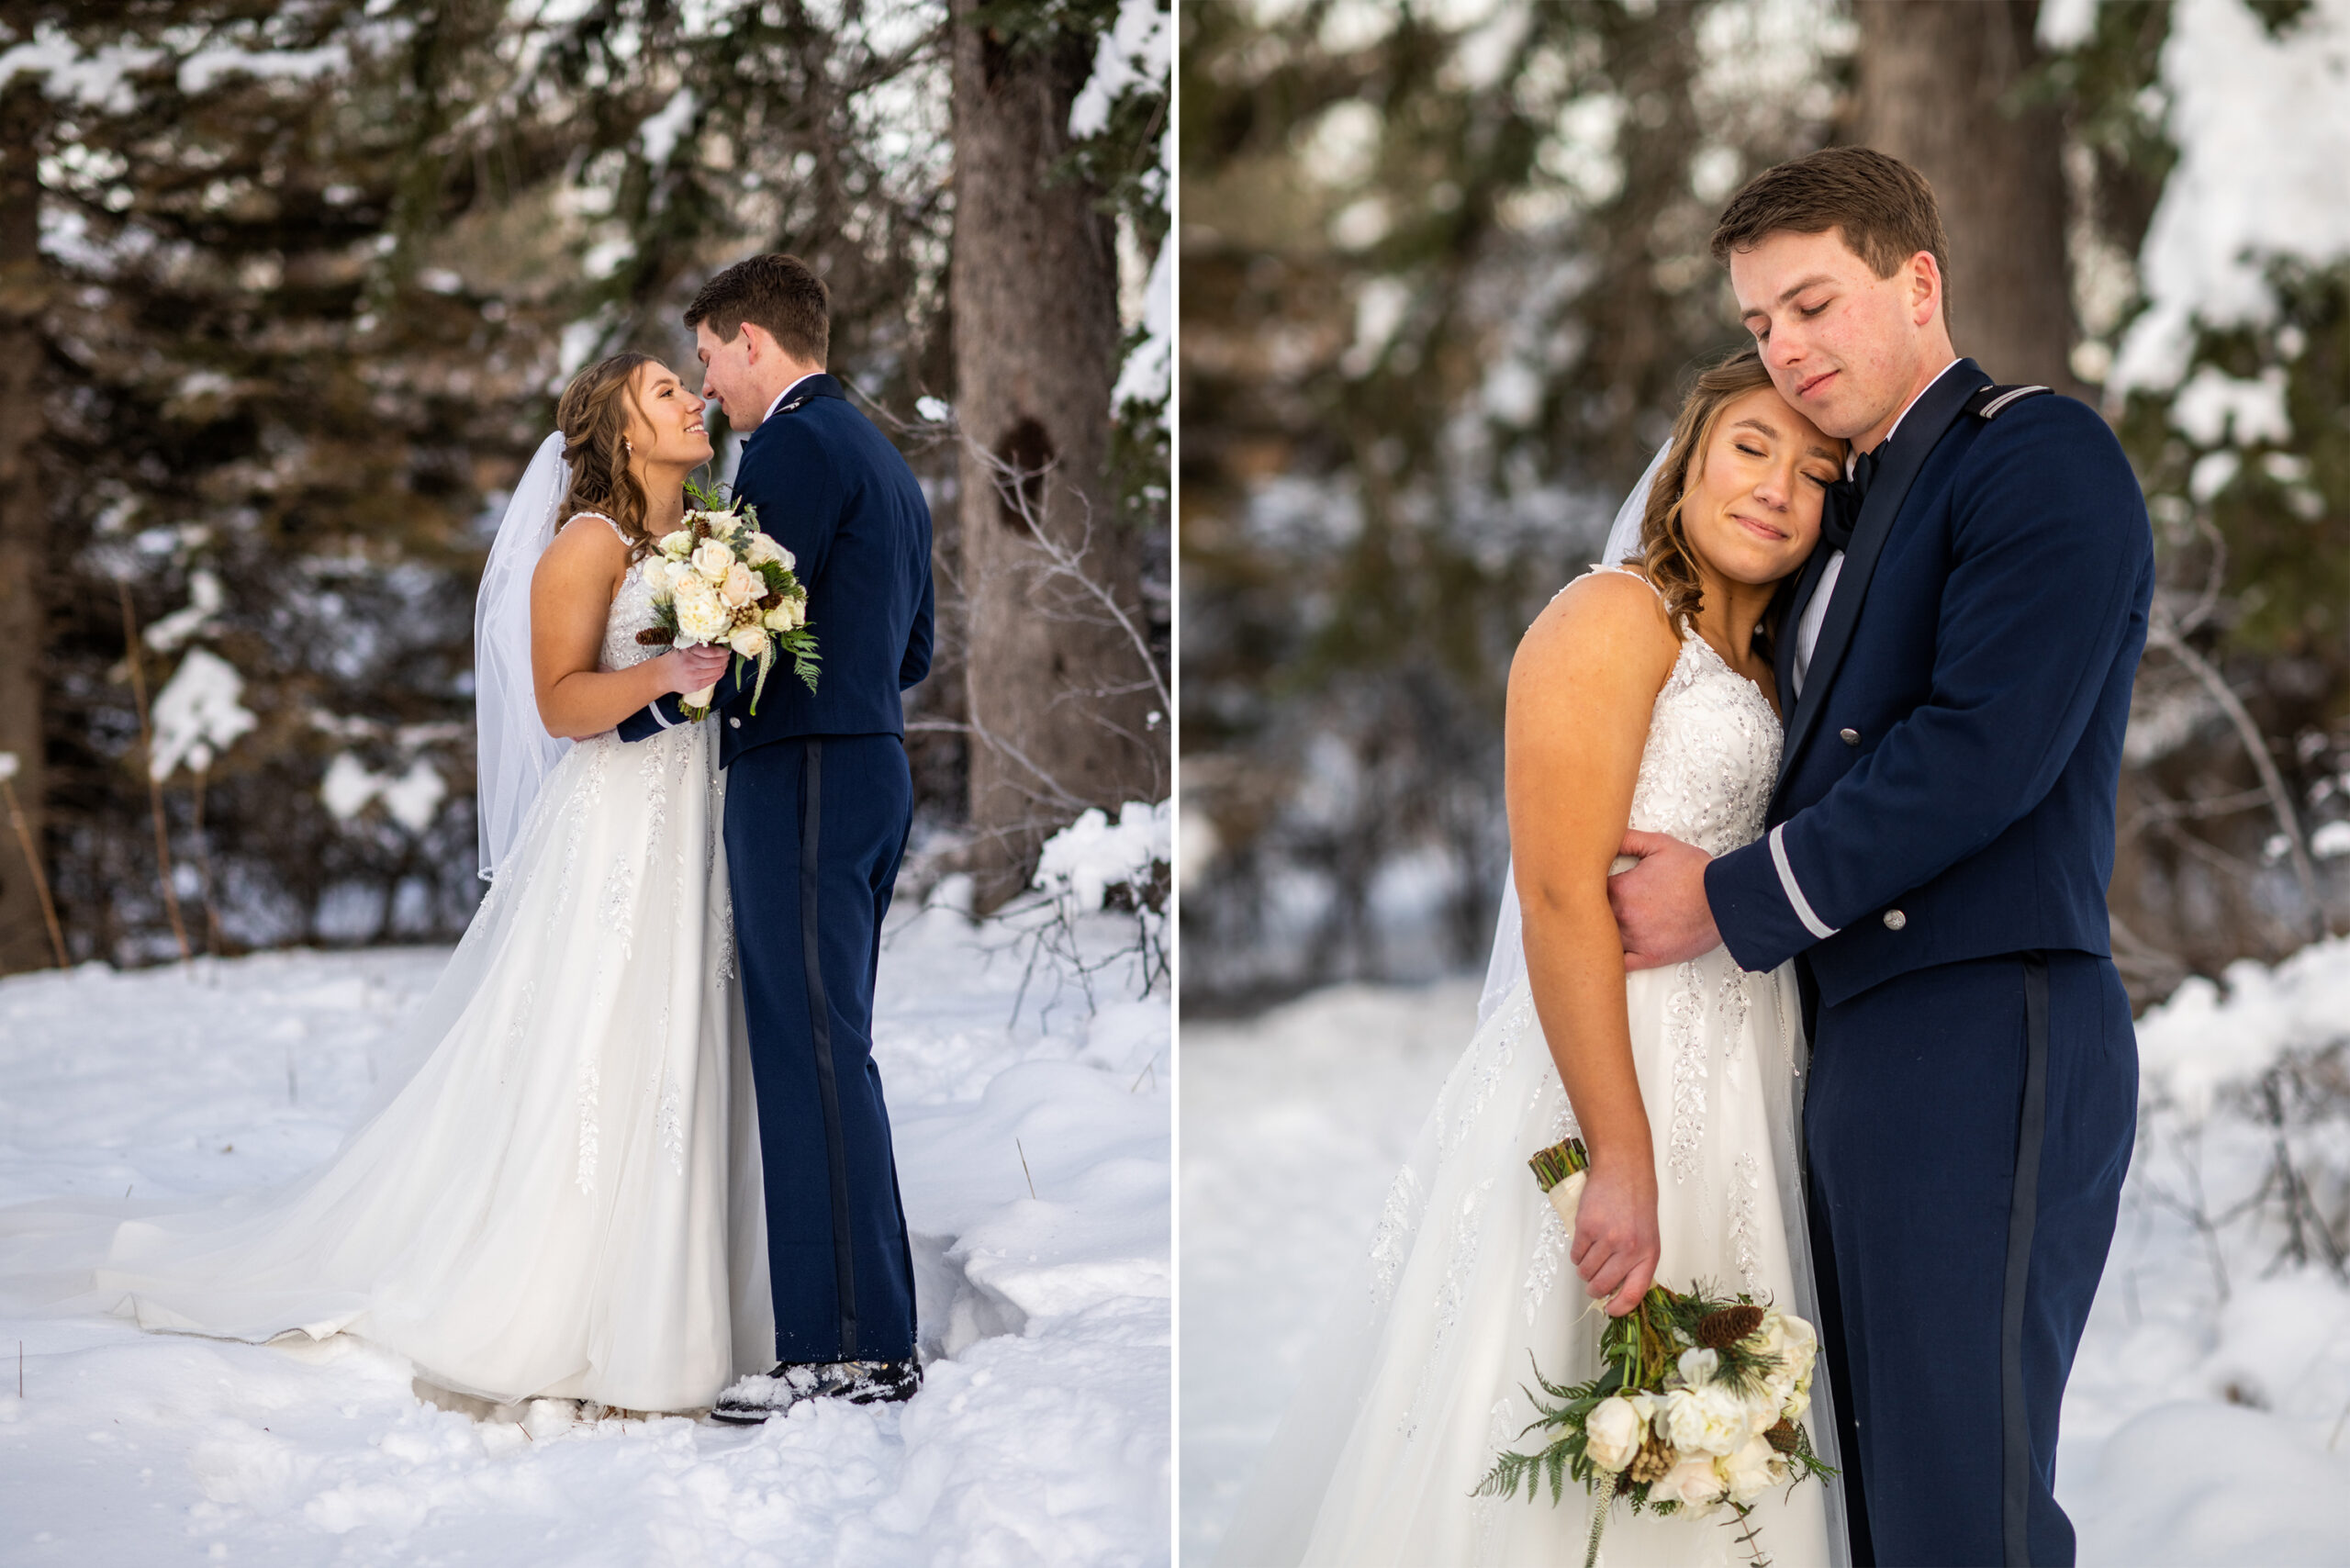 The bride and groom pose in freshly fallen snow at Fly'n B Park in Littleton, Colorado, during their wedding at Ashley Ridge by Wedgewood Weddings.